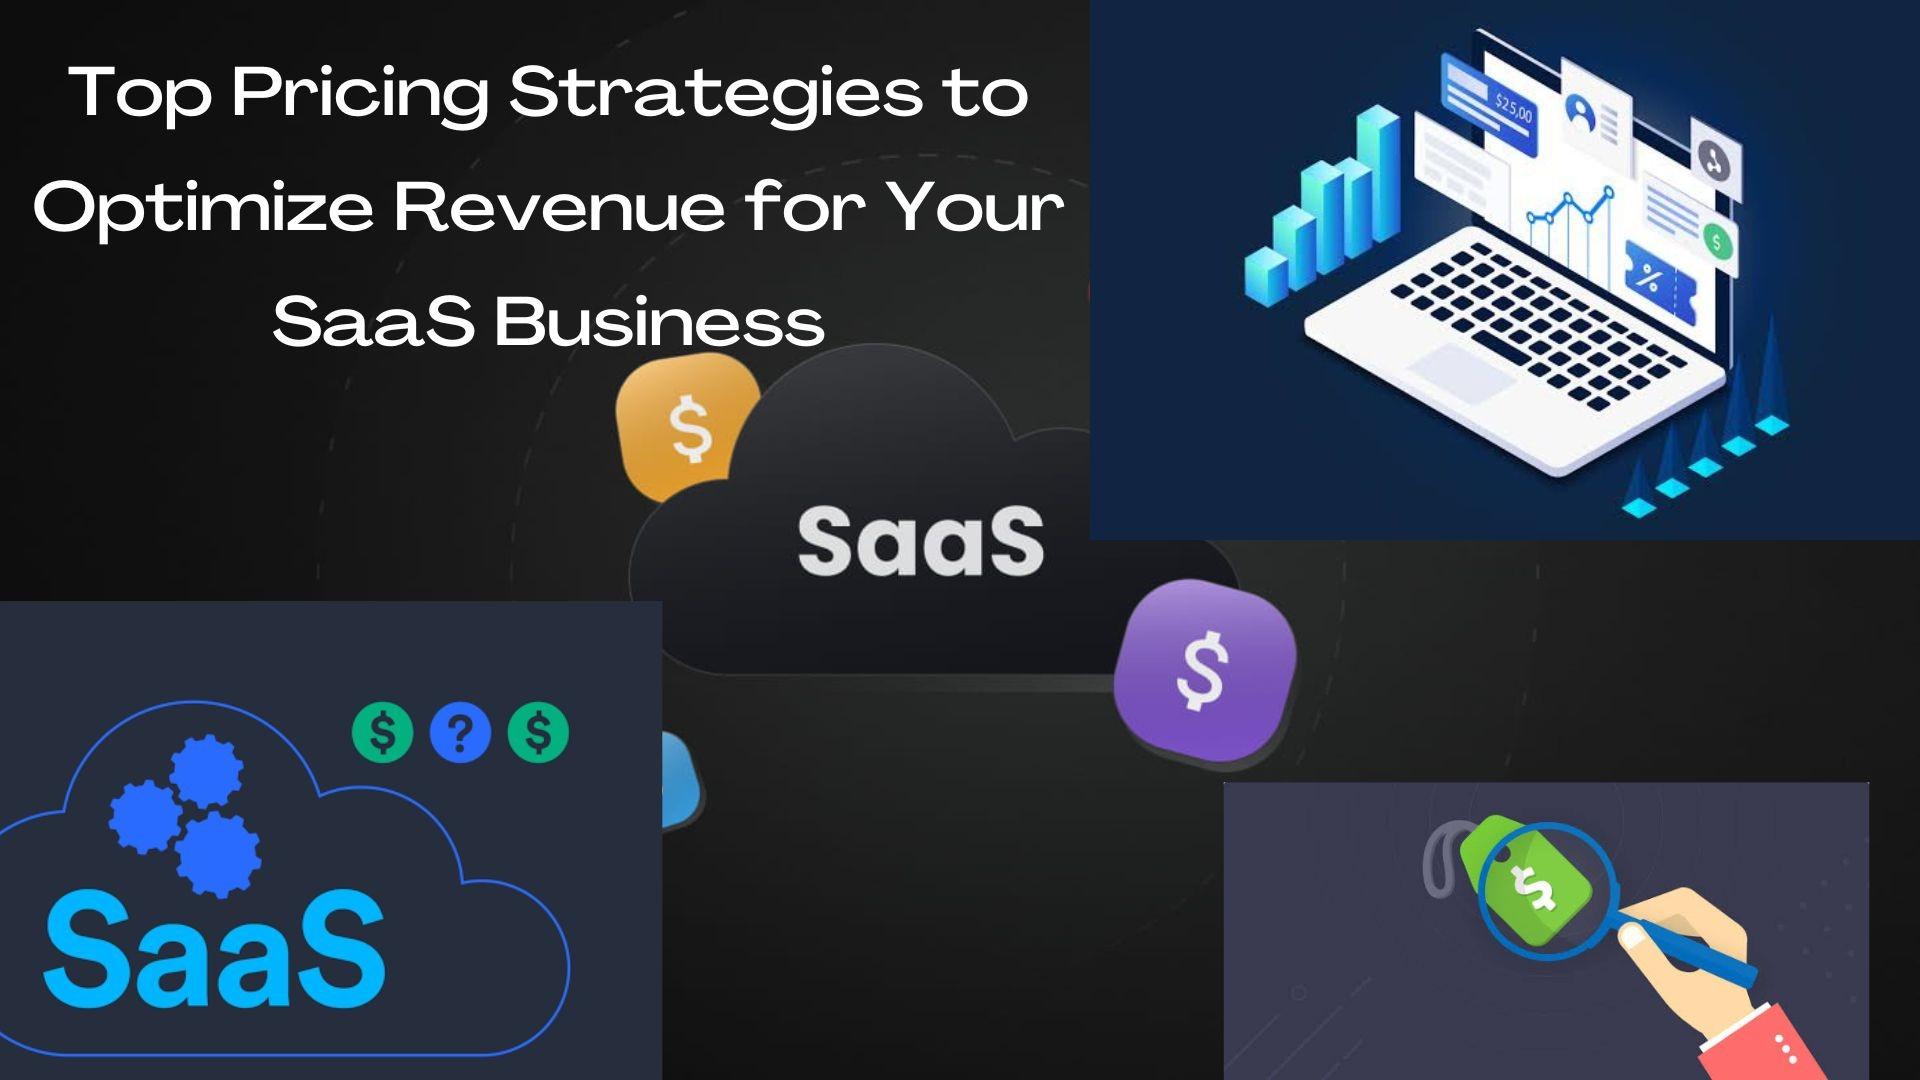 Top Pricing Strategies to Optimize Revenue for Your SaaS Startup